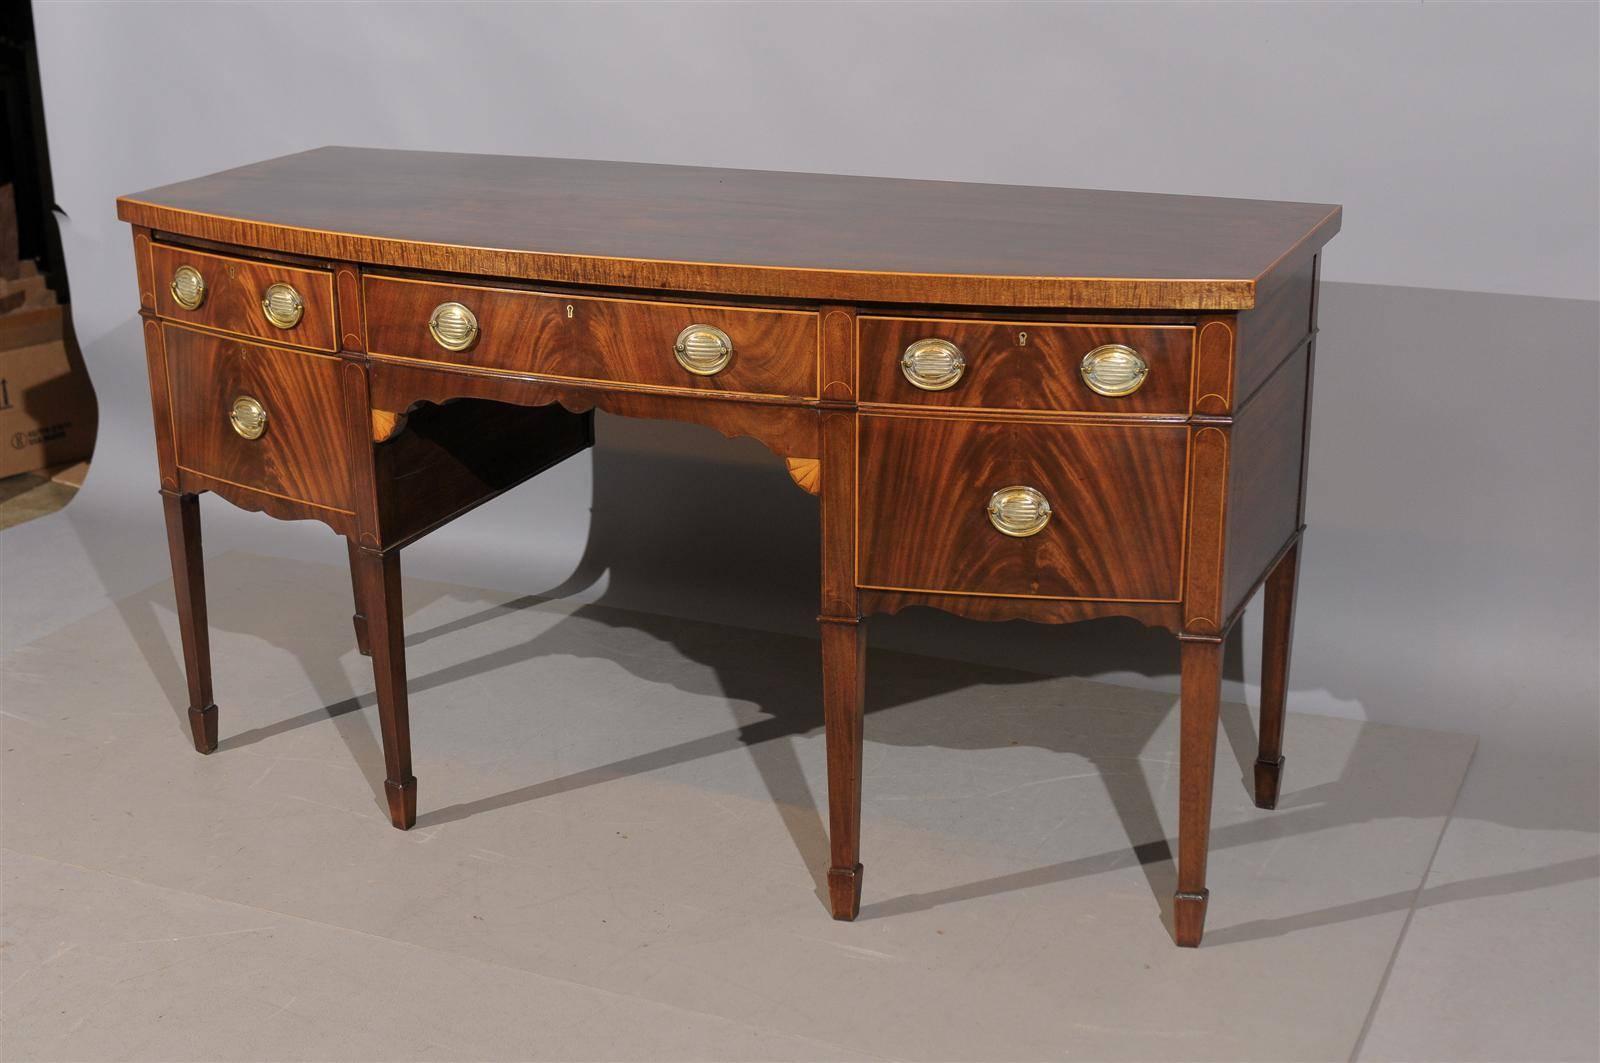 19th Century English Bowfront Mahogany Sideboard with Cellarette Drawer 3